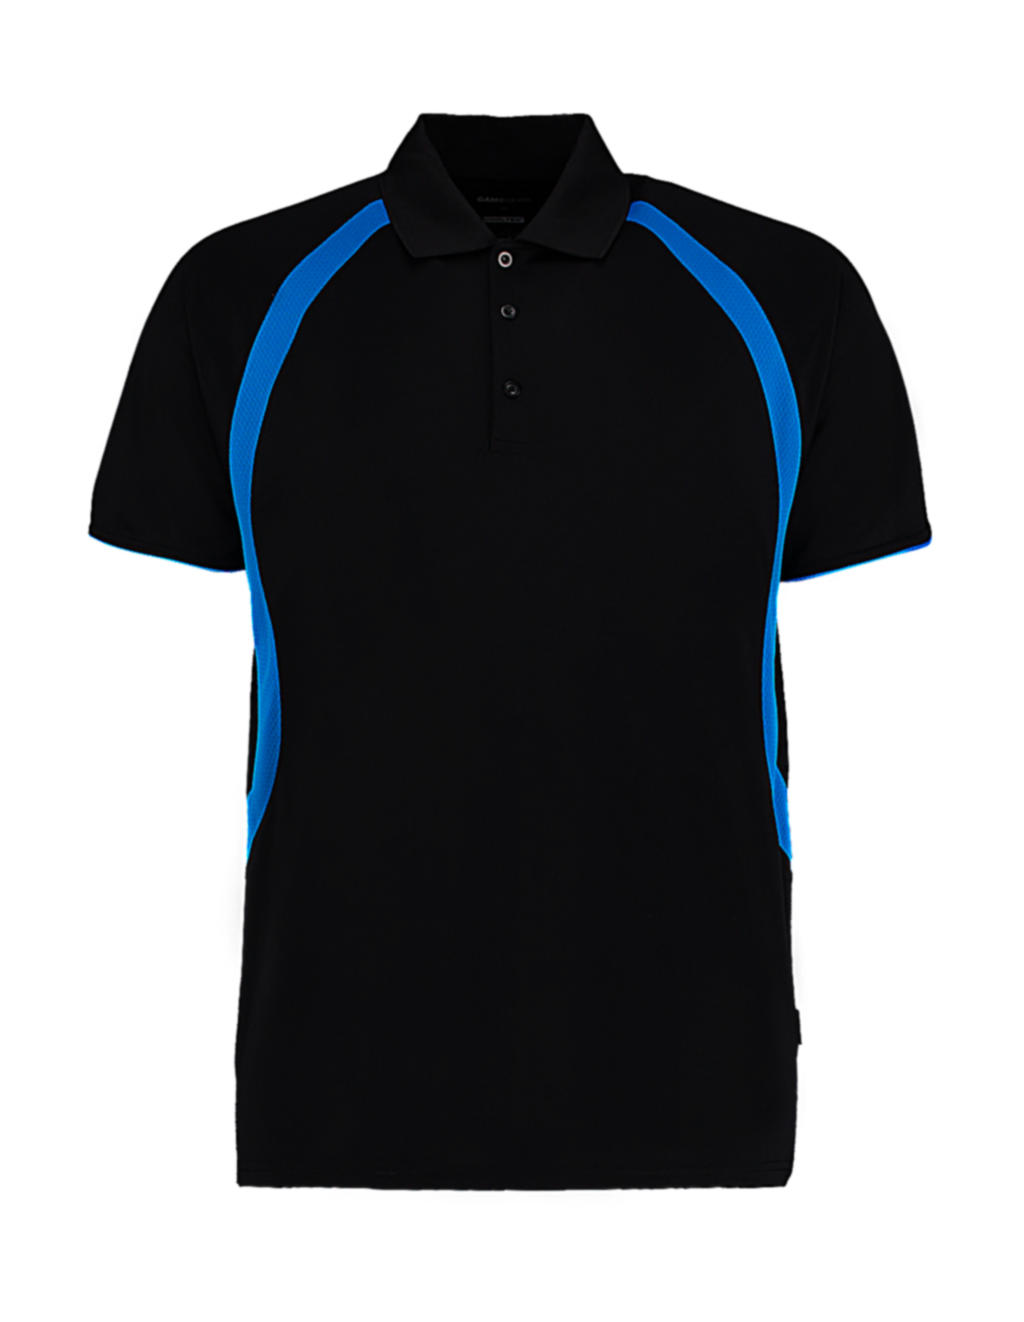 550.11 / Classic Fit Cooltex® Riviera Polo Shirt / Black/Electric Blue